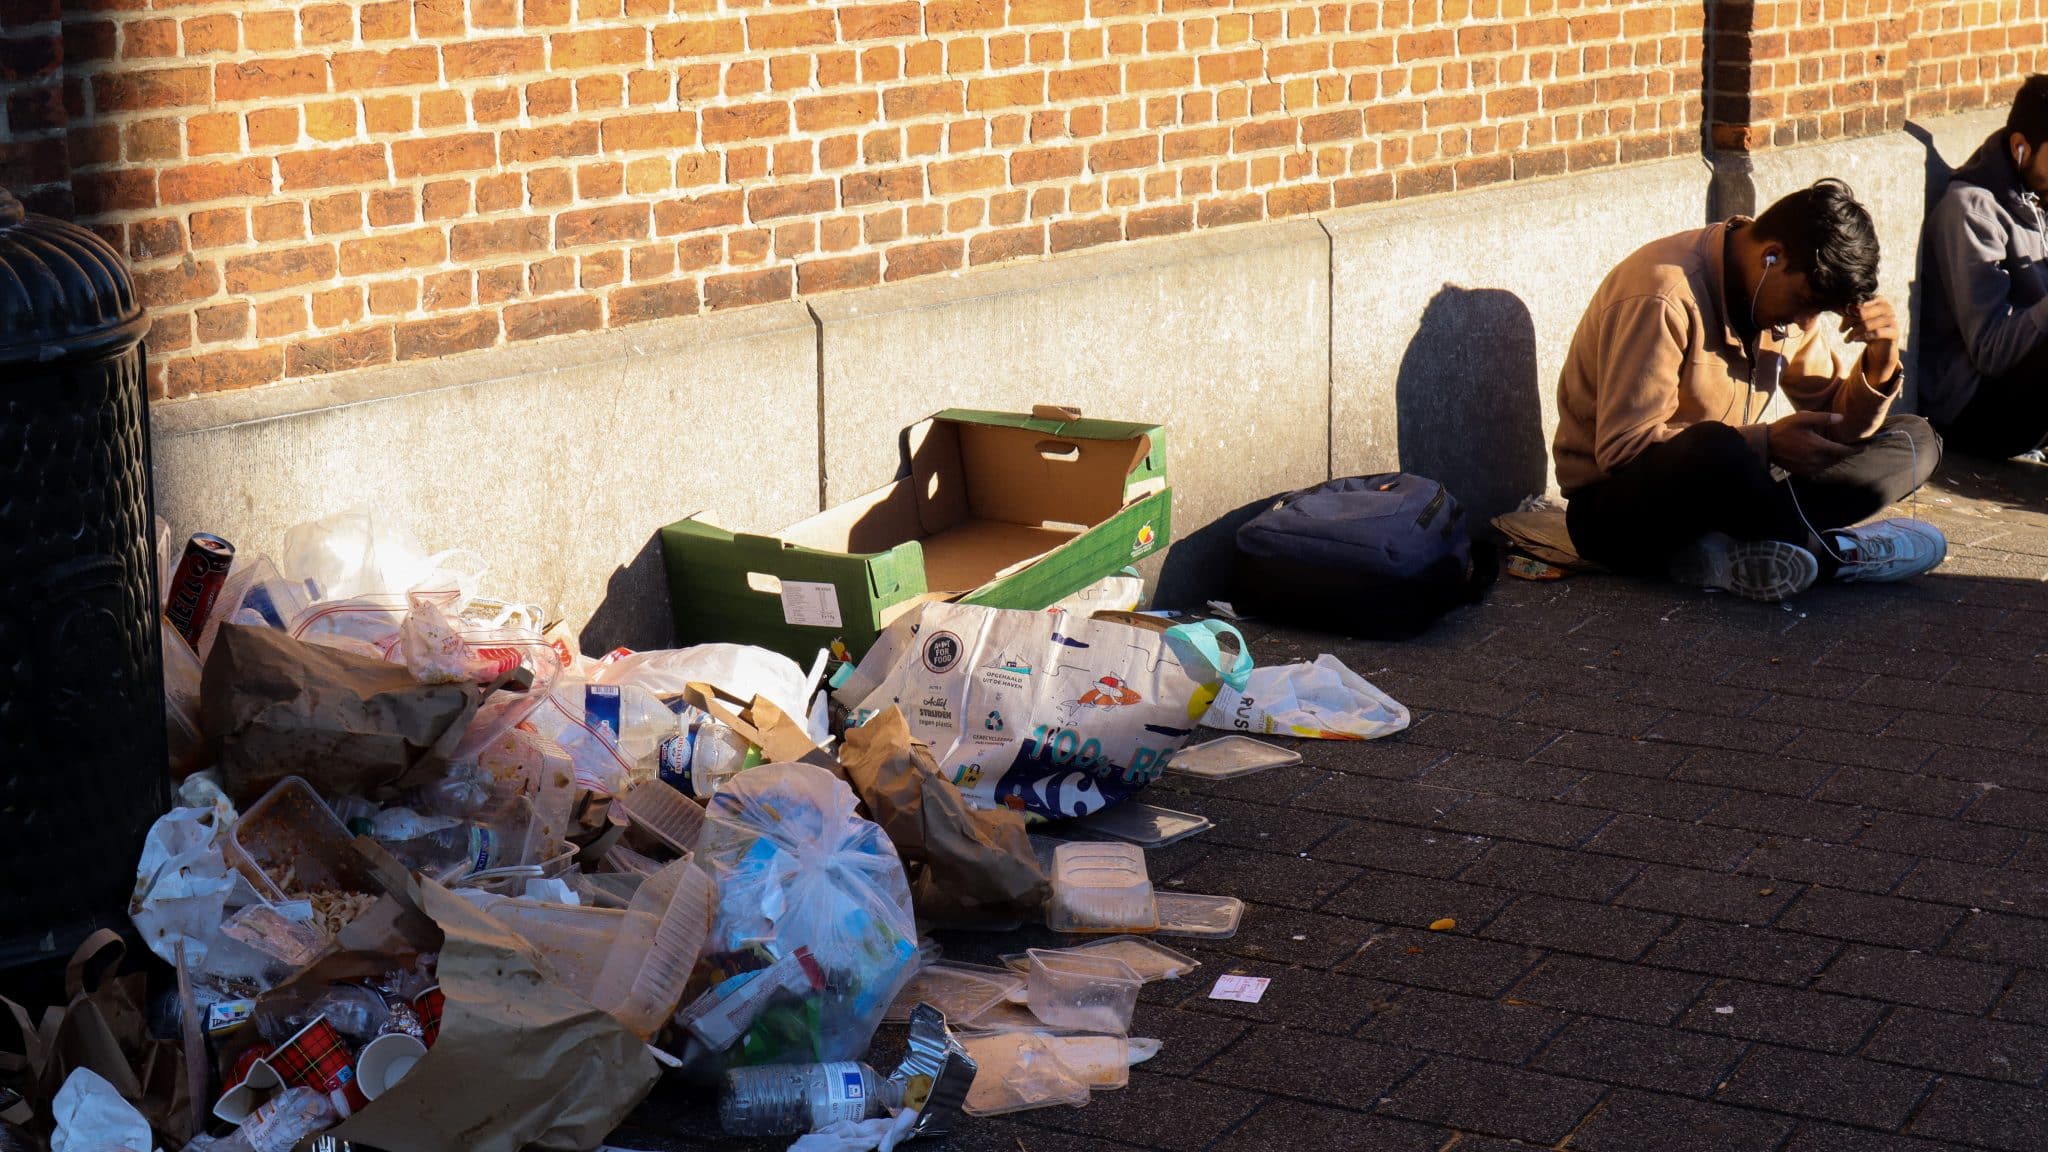 A refugee waiting for the procedure at Fedasil in Brussels, next to a pile of garbage. 